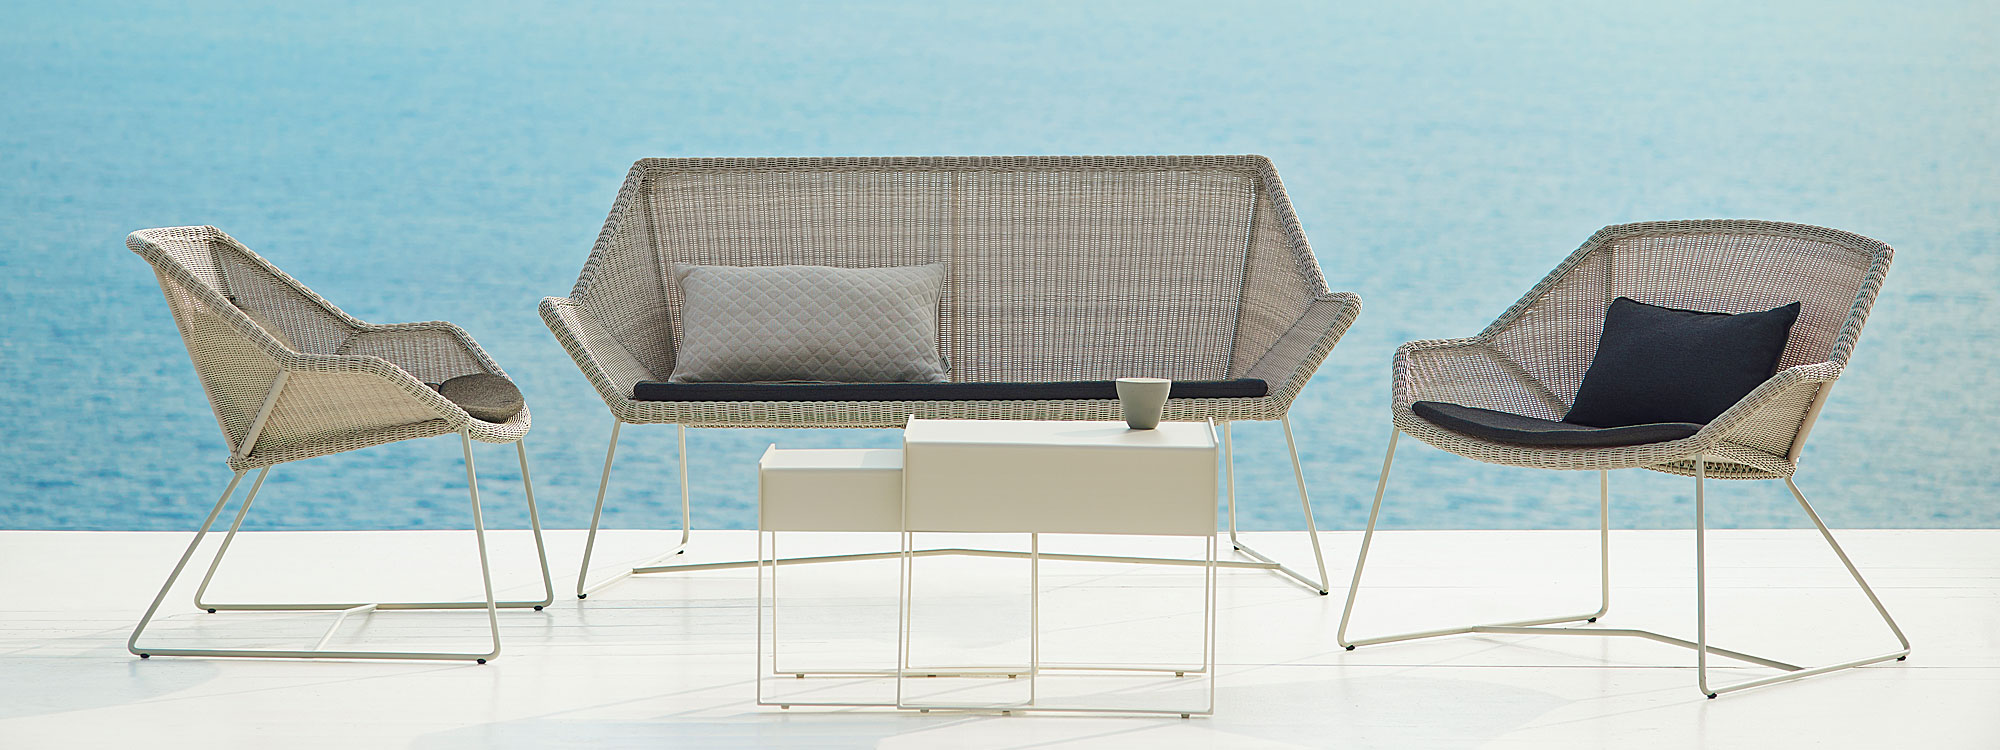 Light-grey Breeze modern outdoor lounge furniture includes a contemporary garden sofa & garden relax chairs by Cane-line all-weather furniture company.